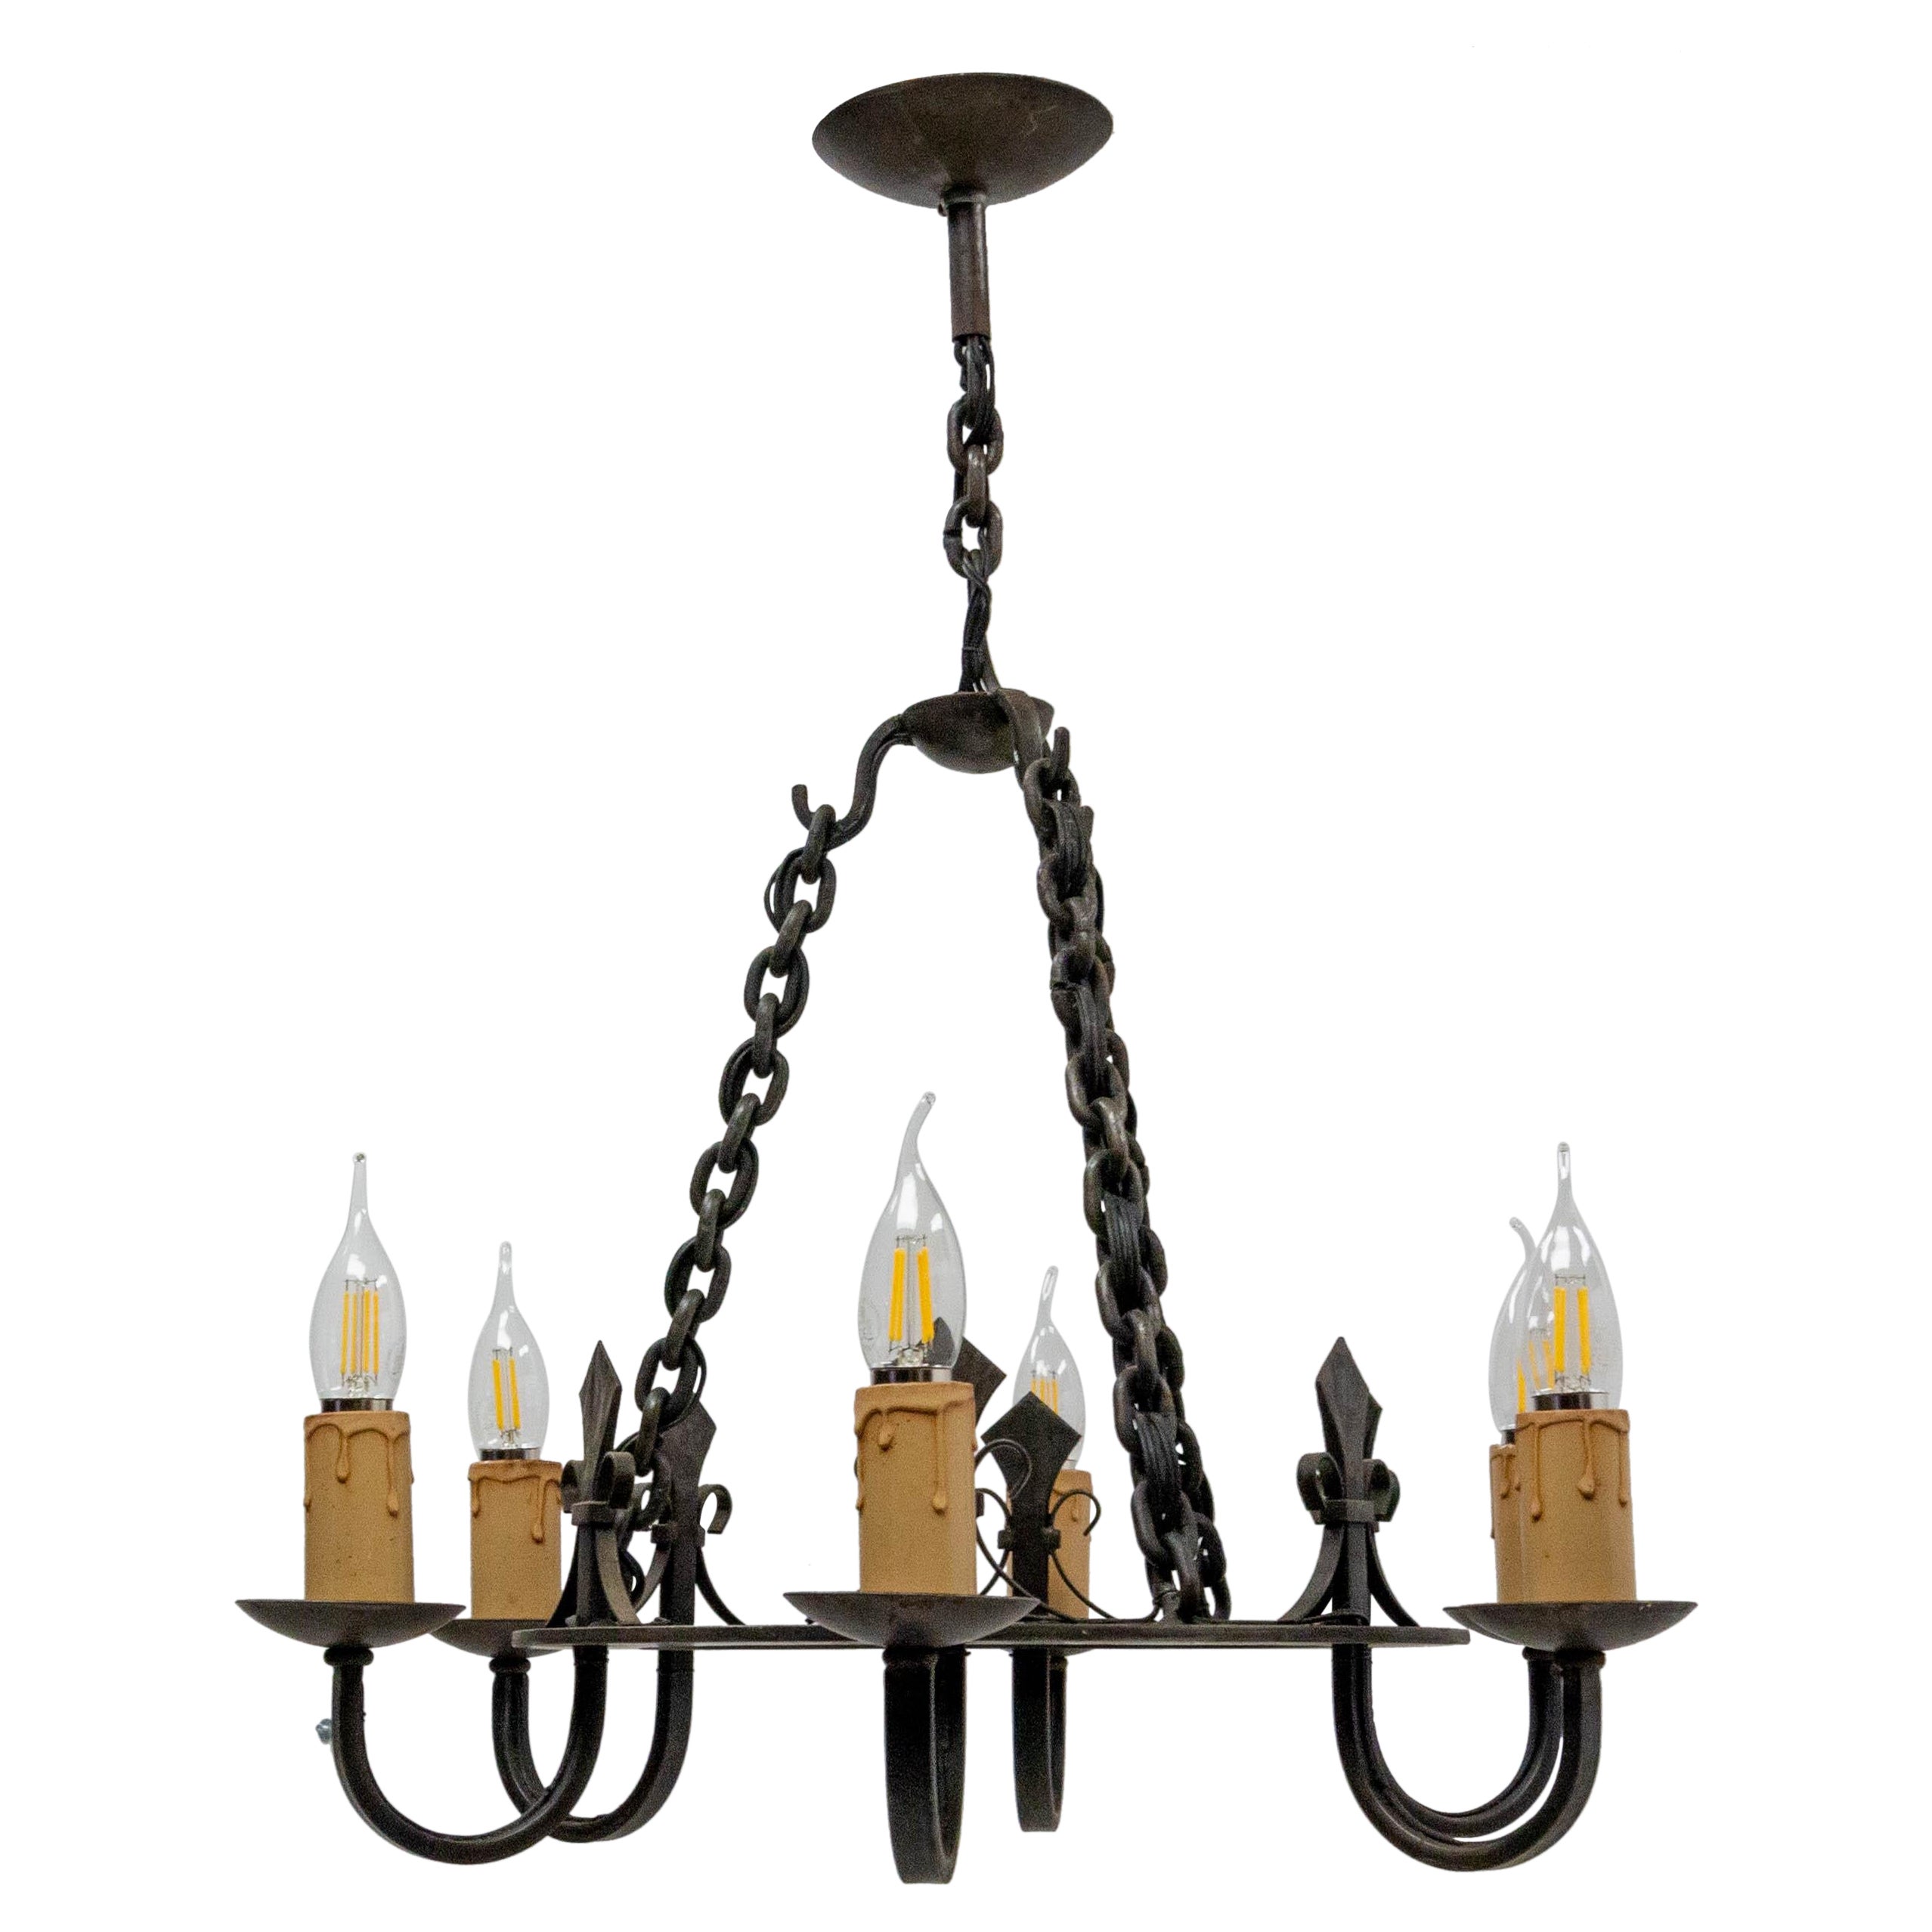 French Lustre Wrought Iron with Fleur-de-lys Chandelier, circa 1940